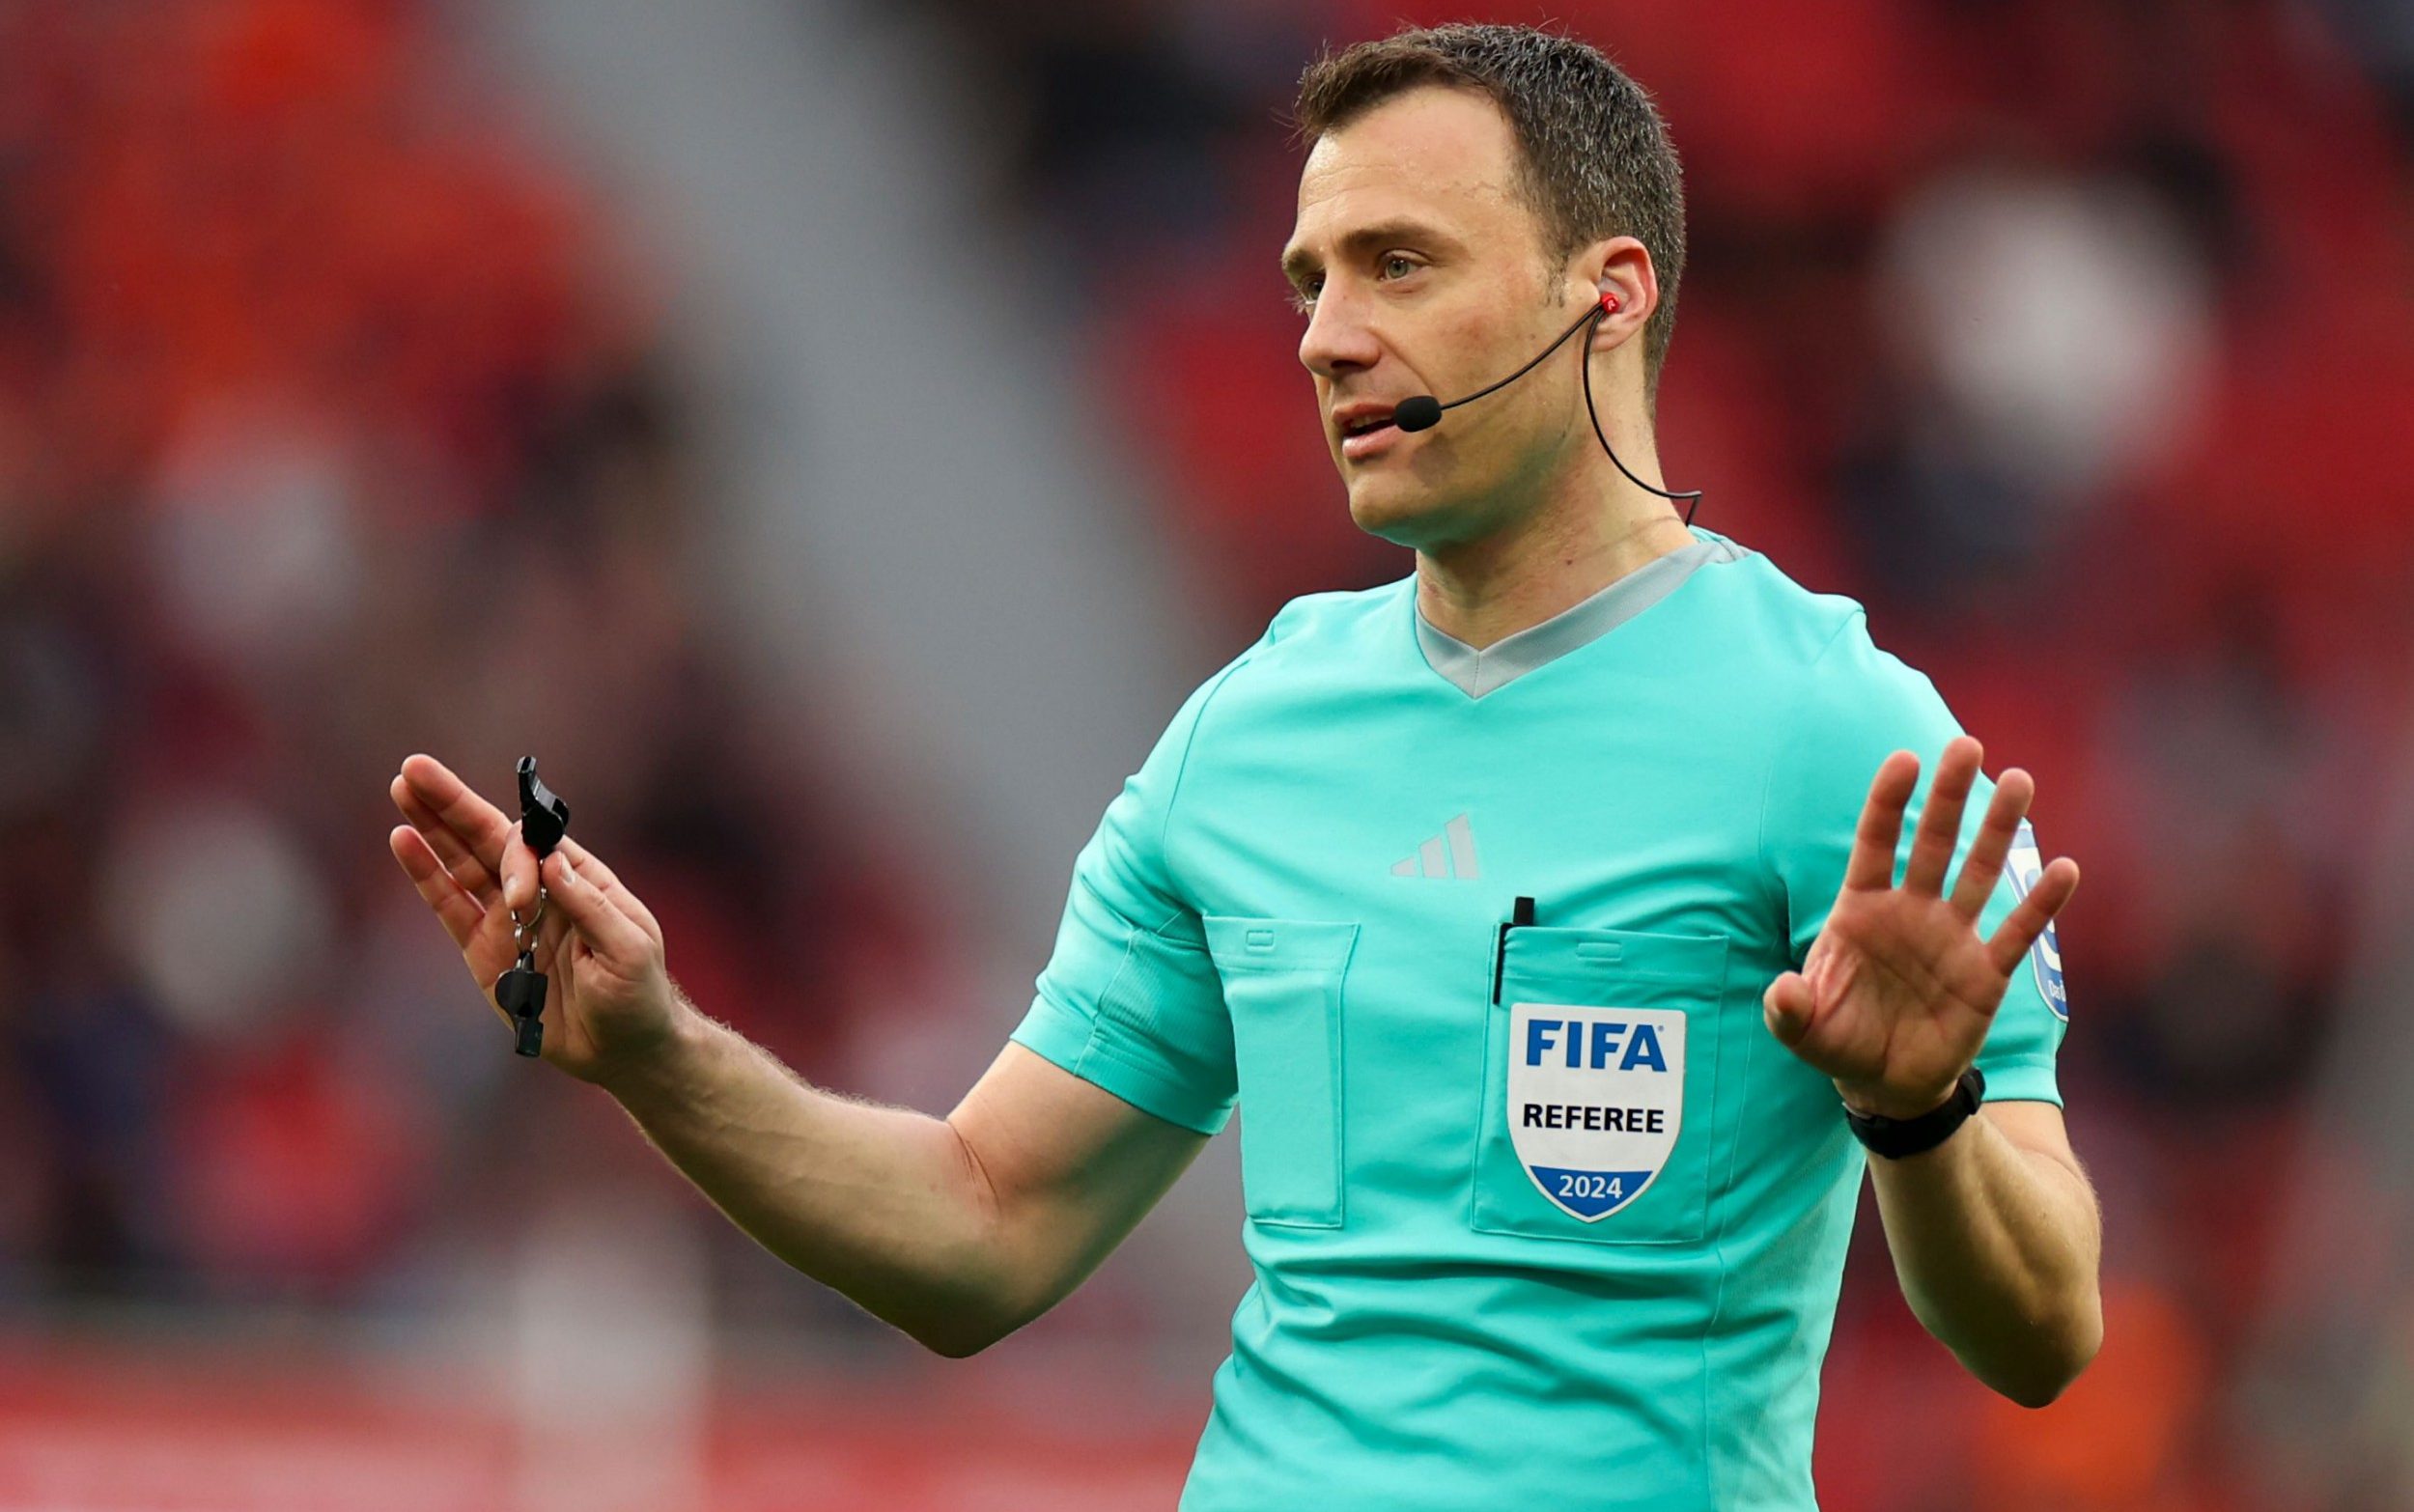 referee in aston villa’s conference league semi-final was banned in match-fixing scandal